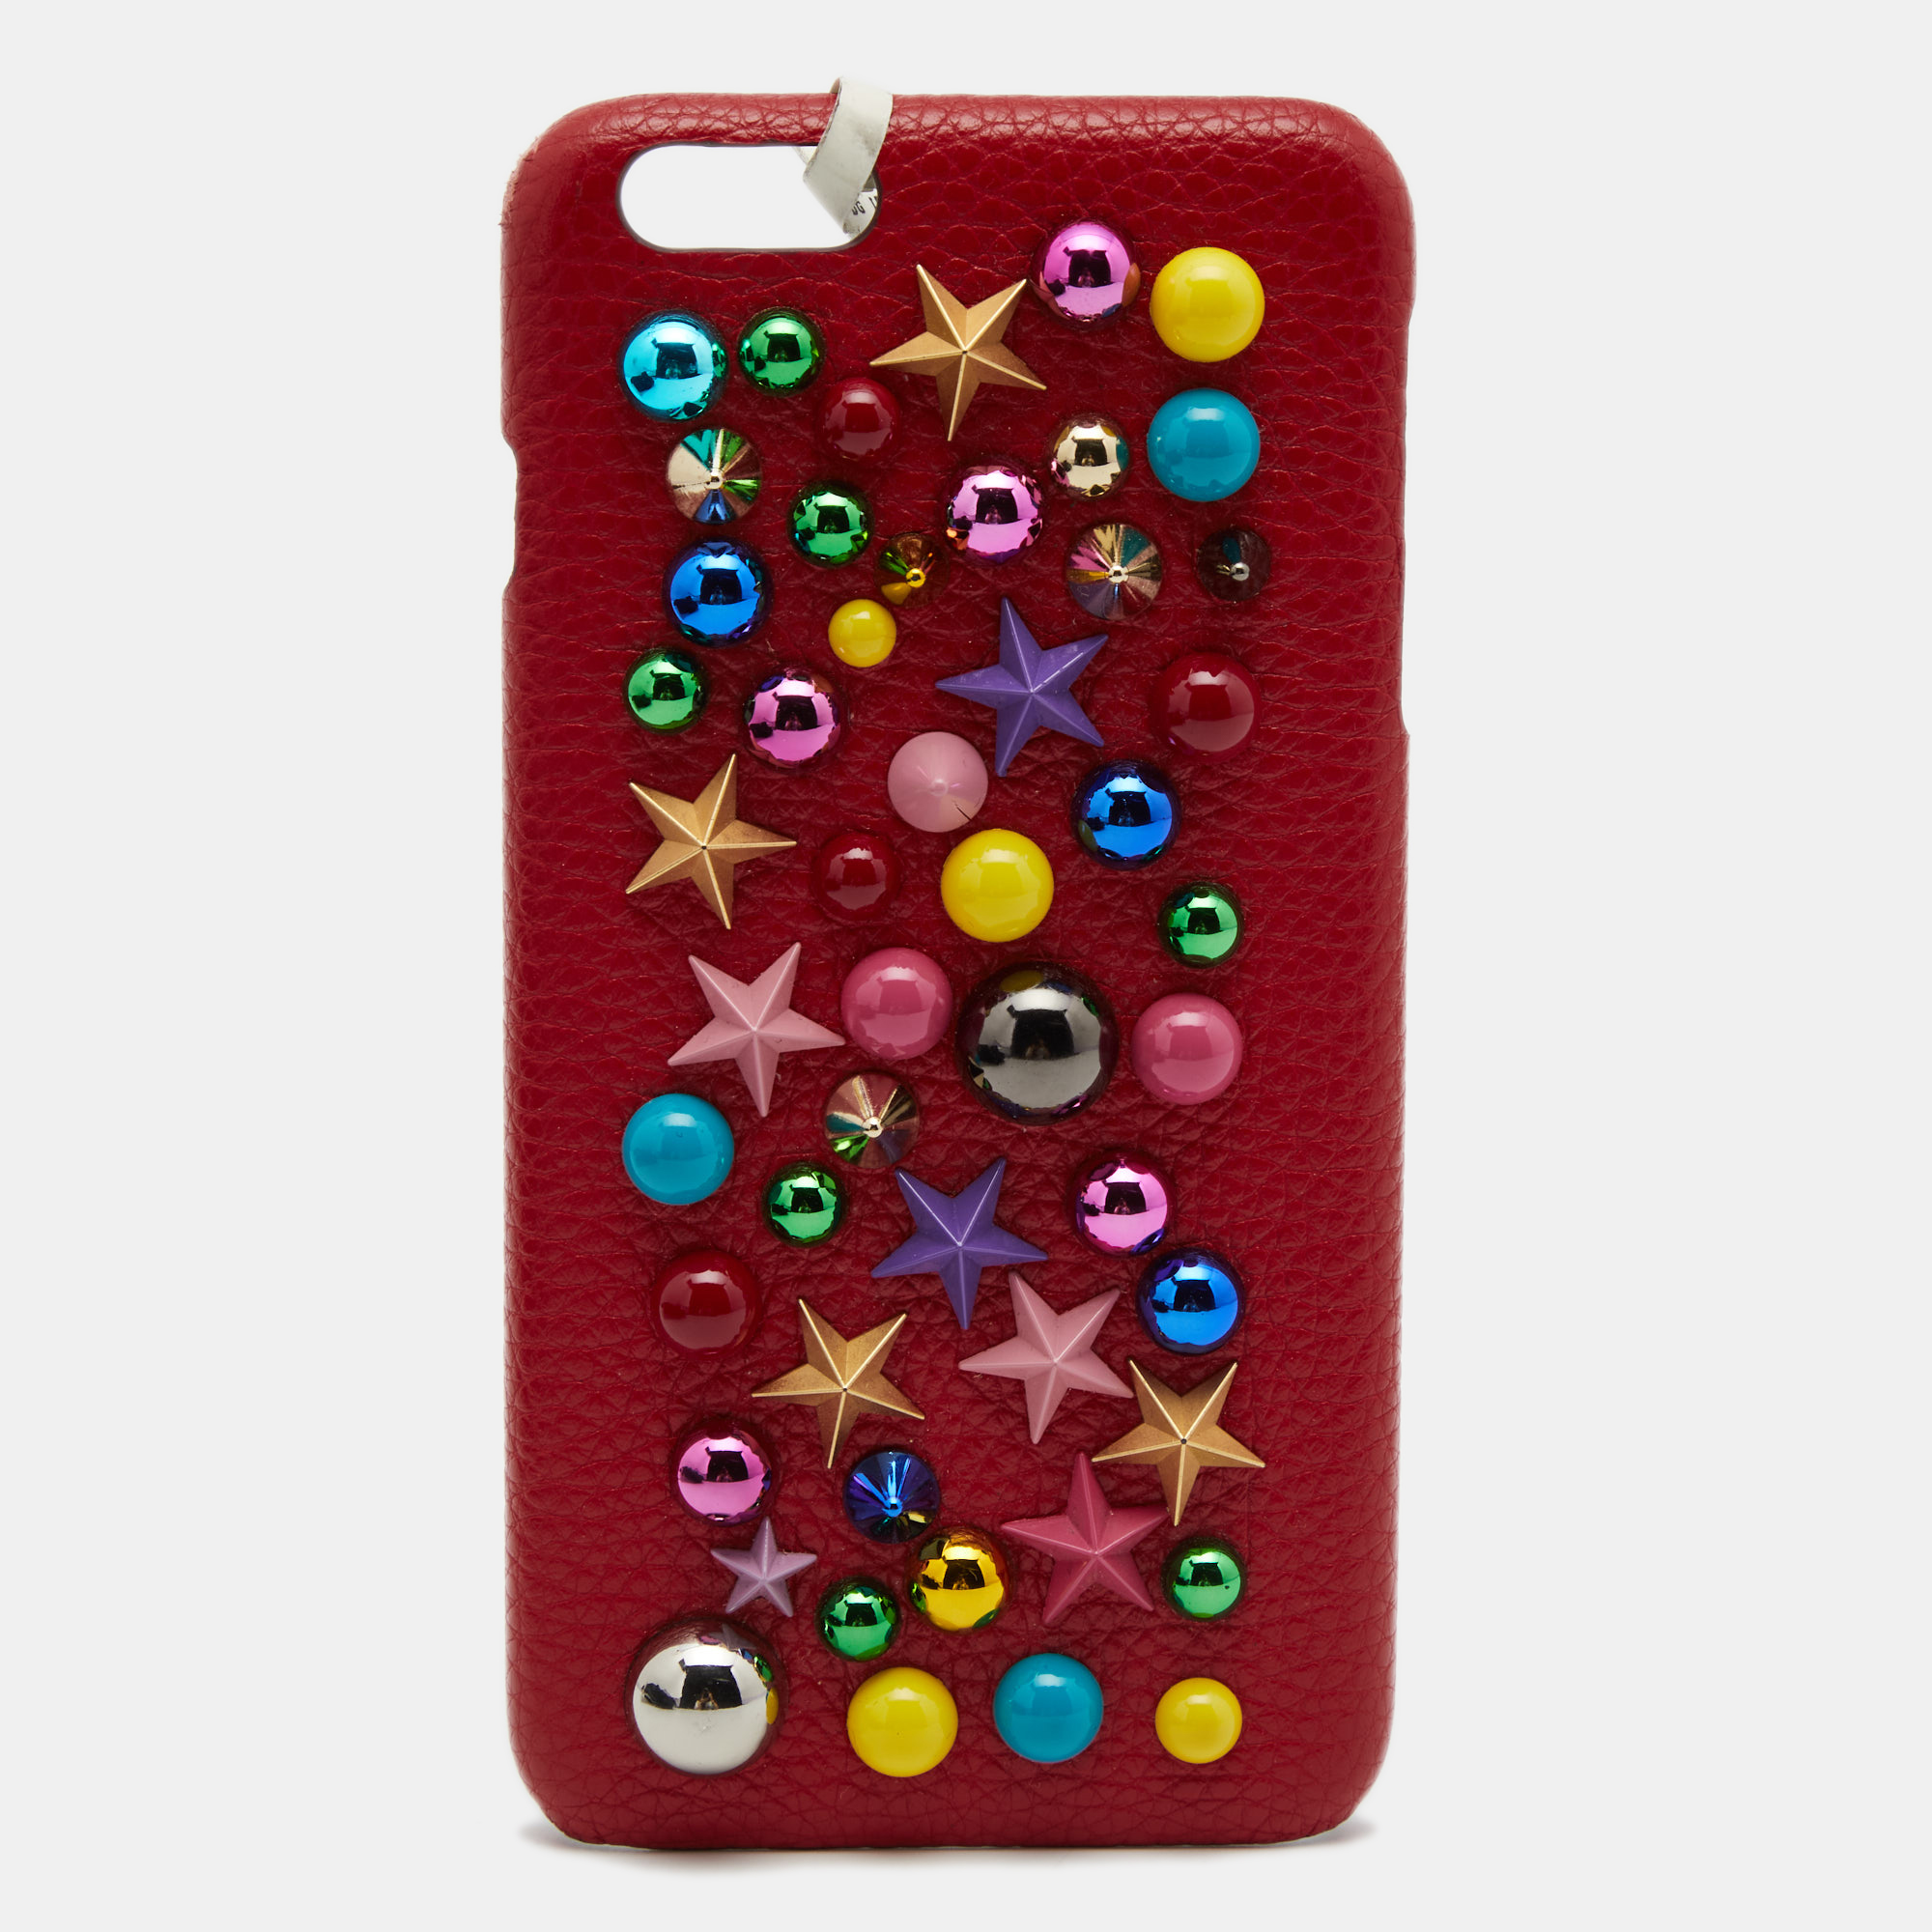 Pre-owned Dolce & Gabbana Red Leather Embellished Iphone 6 Plus Cover